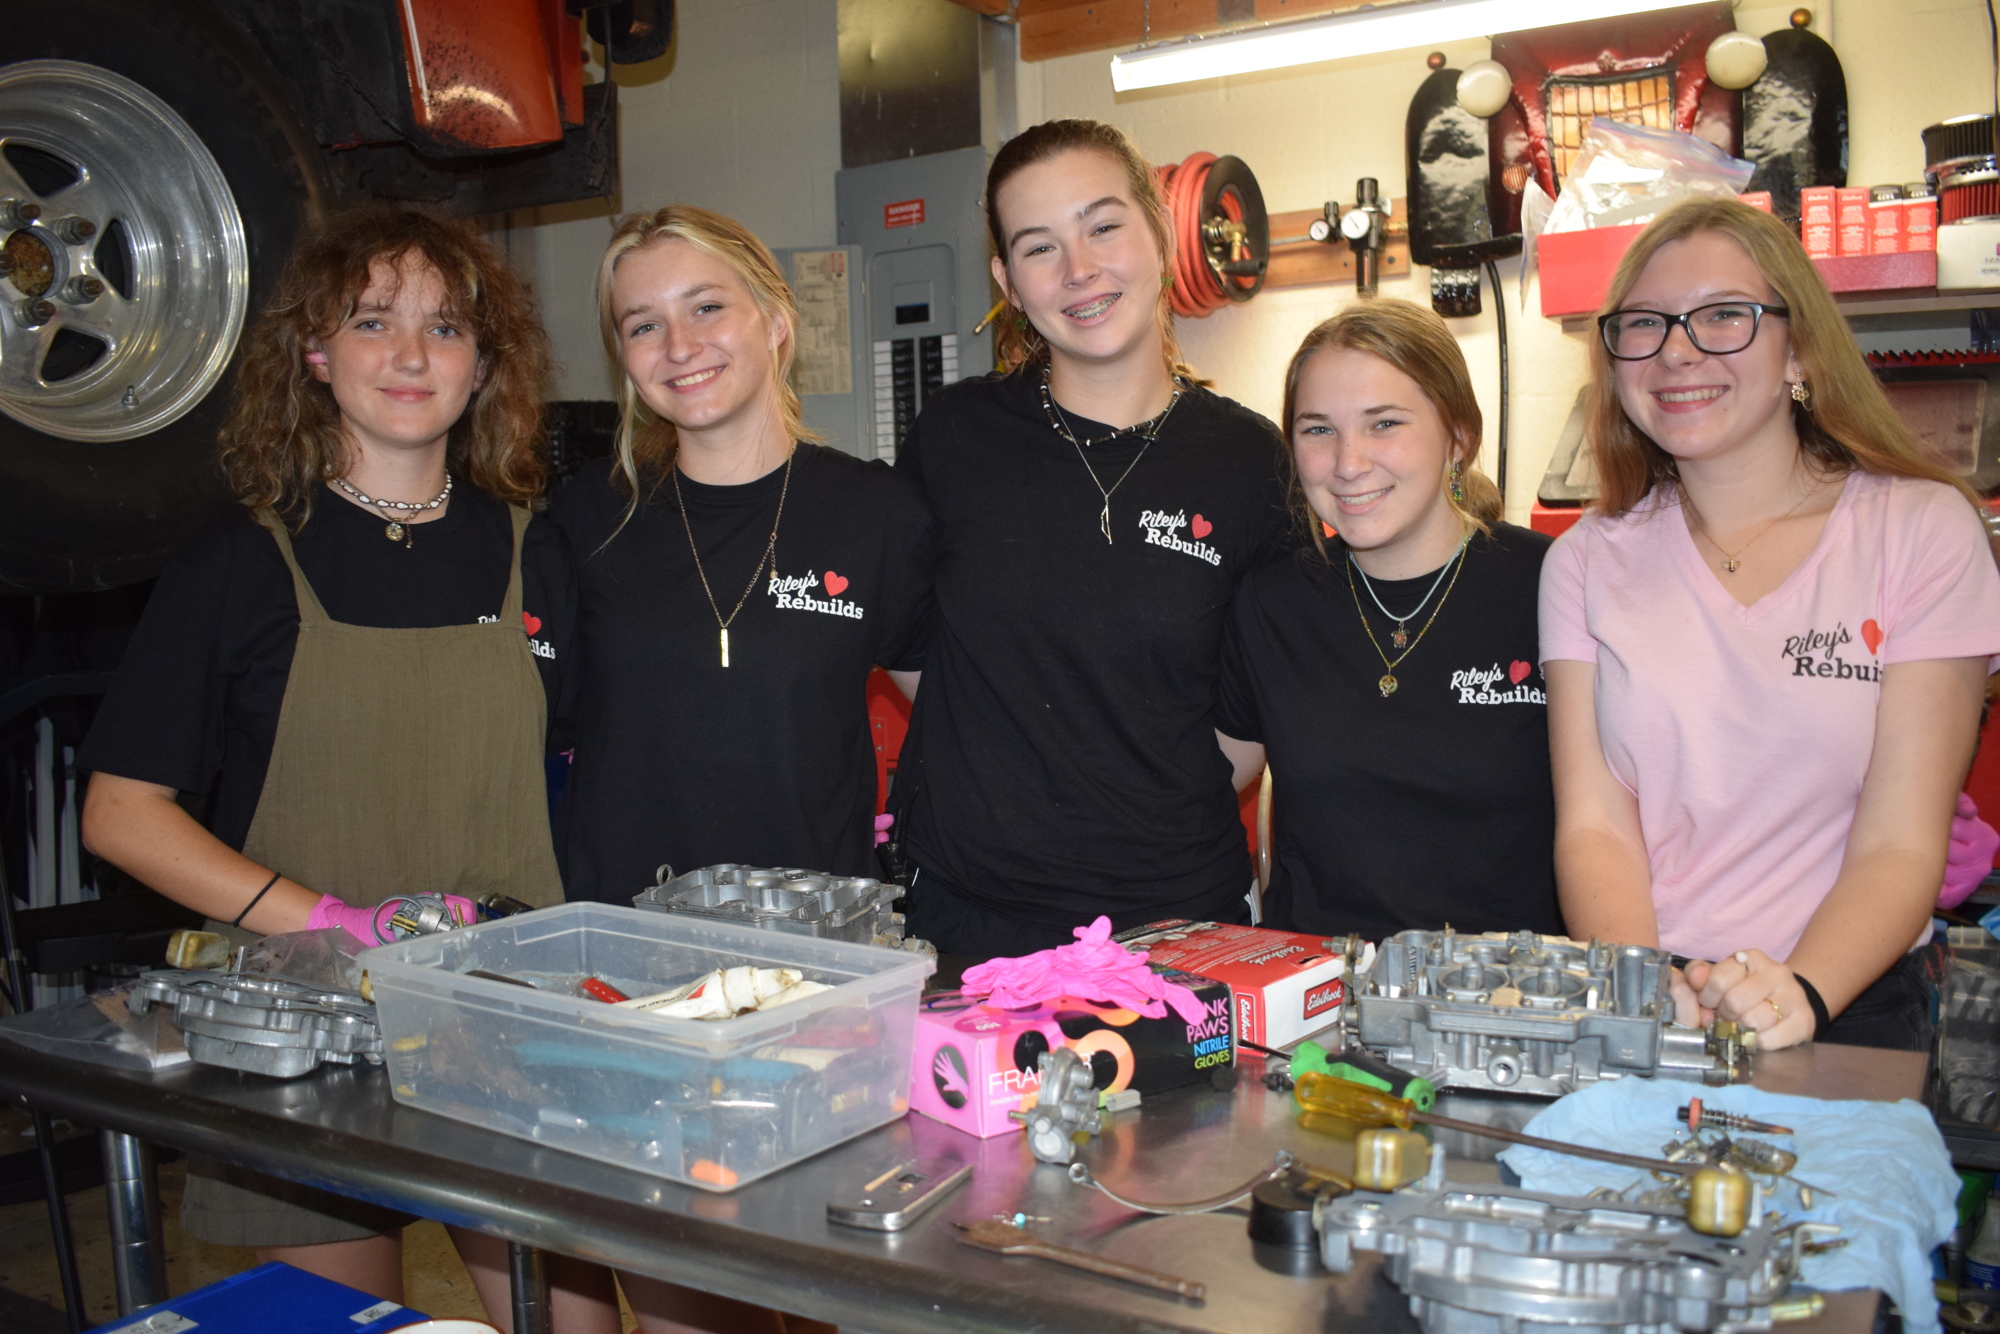 Amelia Sabo, Catie Burgess, Riley Schlick-Trask, Dagny Van Aken, and Elaine Zdancewicz make up the crew at Riley's Rebuilds. (Photo by Jay Heater)